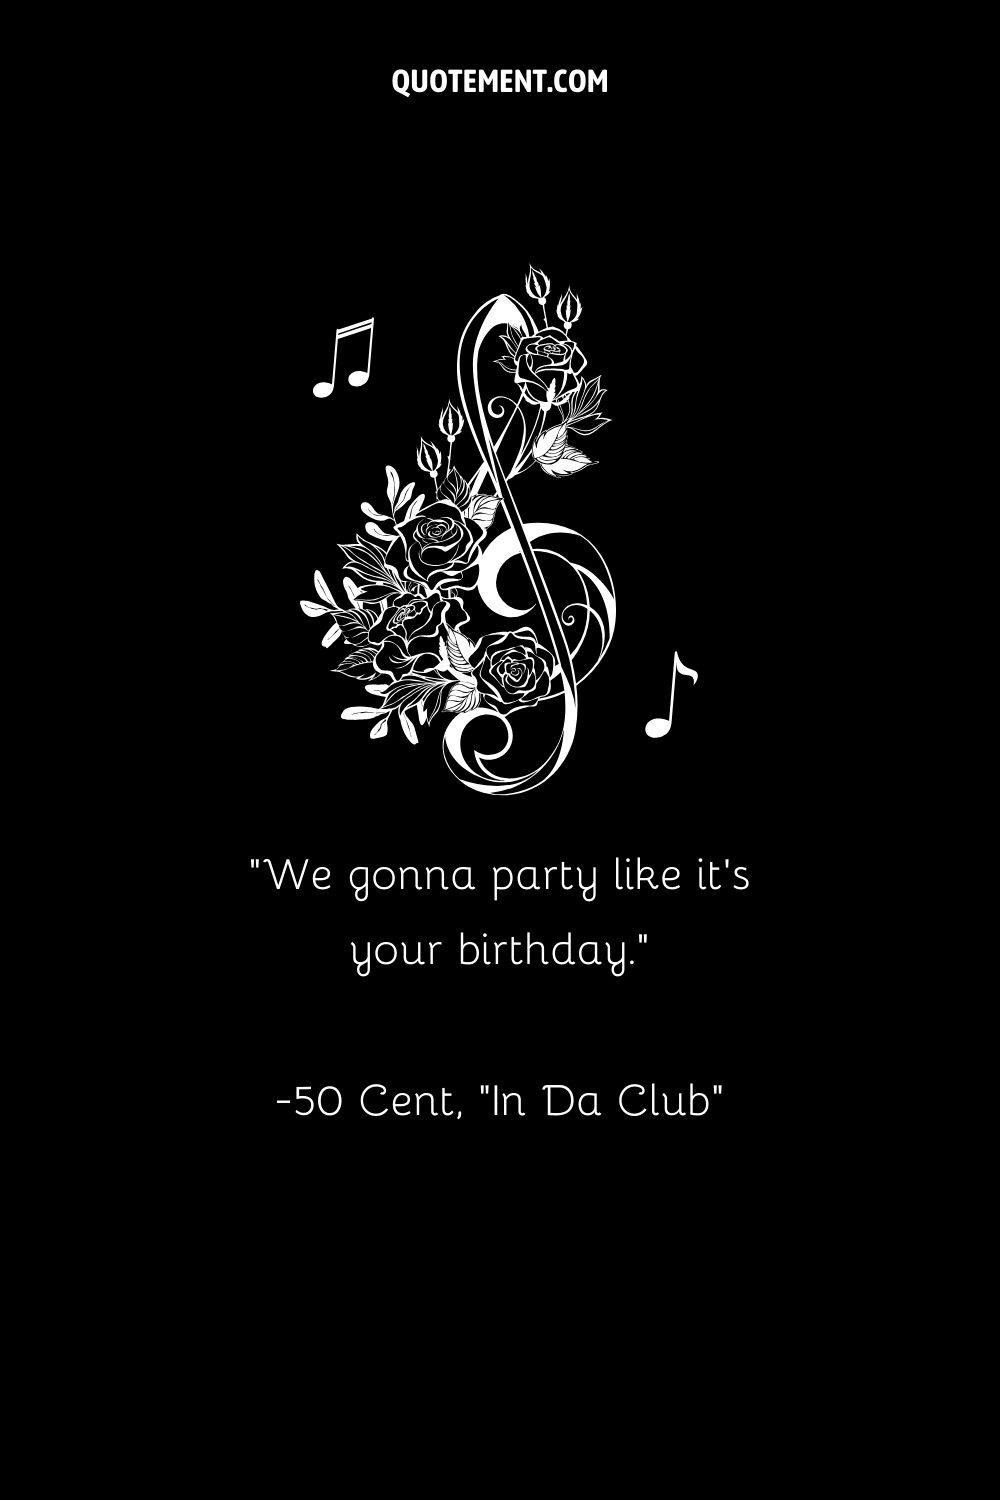 Treble clef illustration representing lyrics about partying.